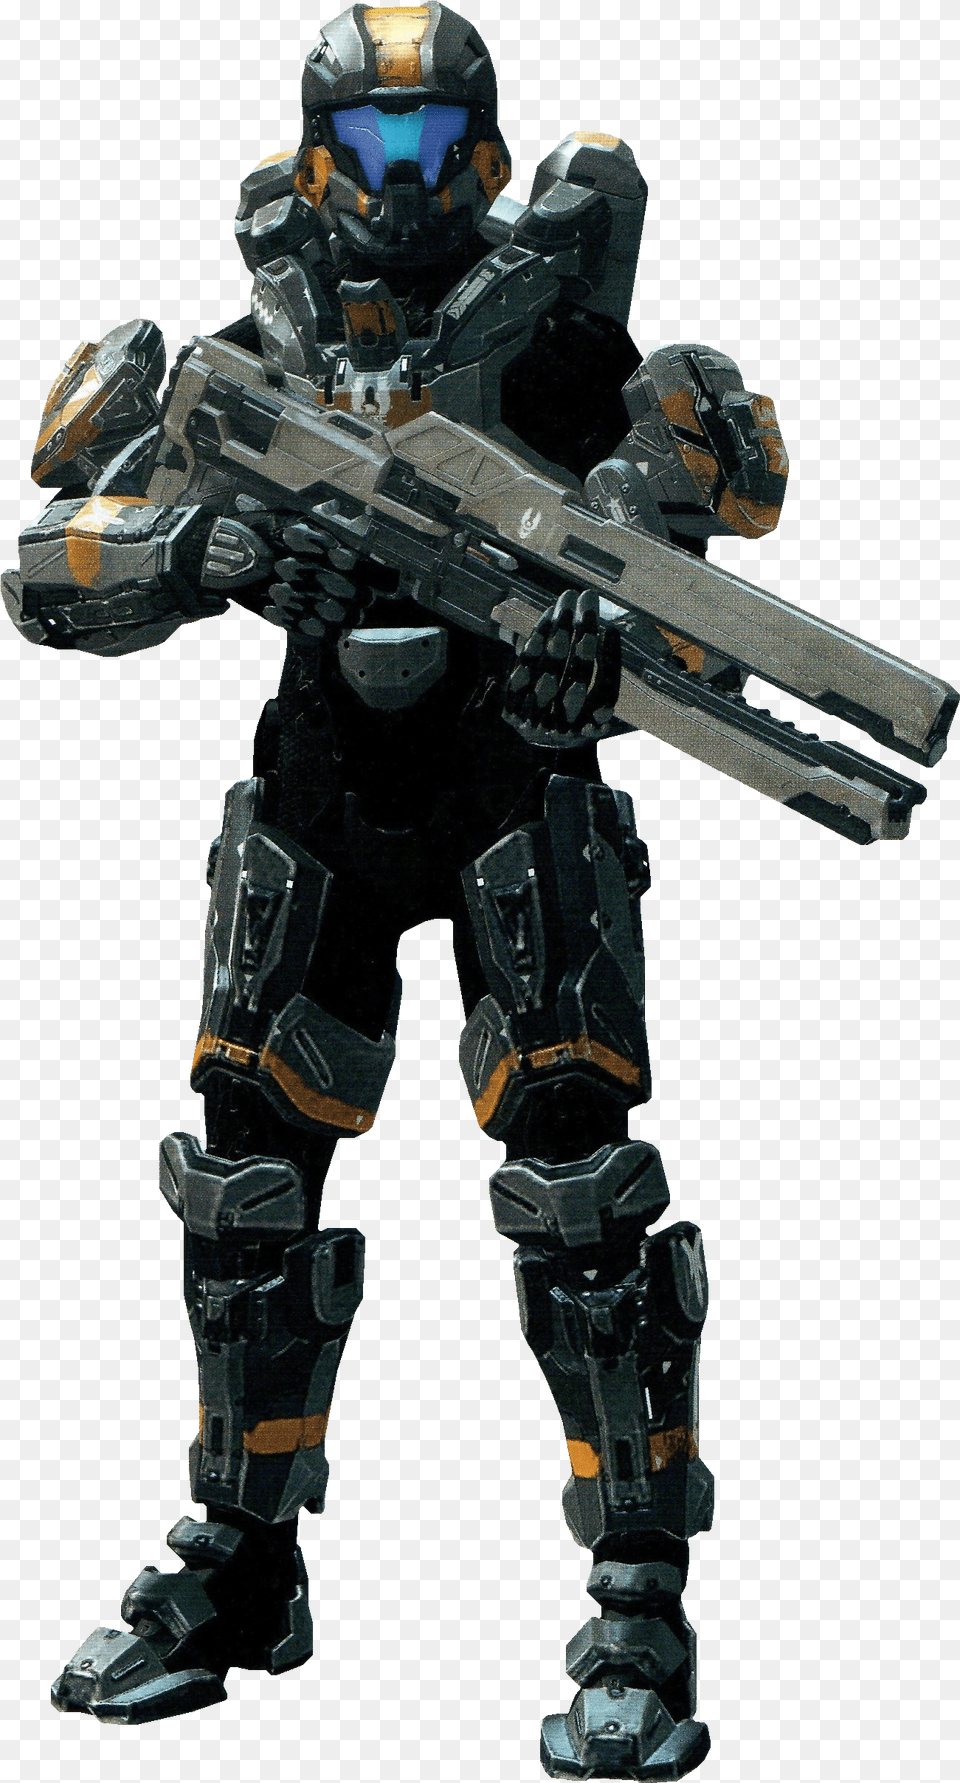 The Halo 4 Campaign Recruits Halo 5 Spartan, Toy, Gun, Weapon, Helmet Png Image